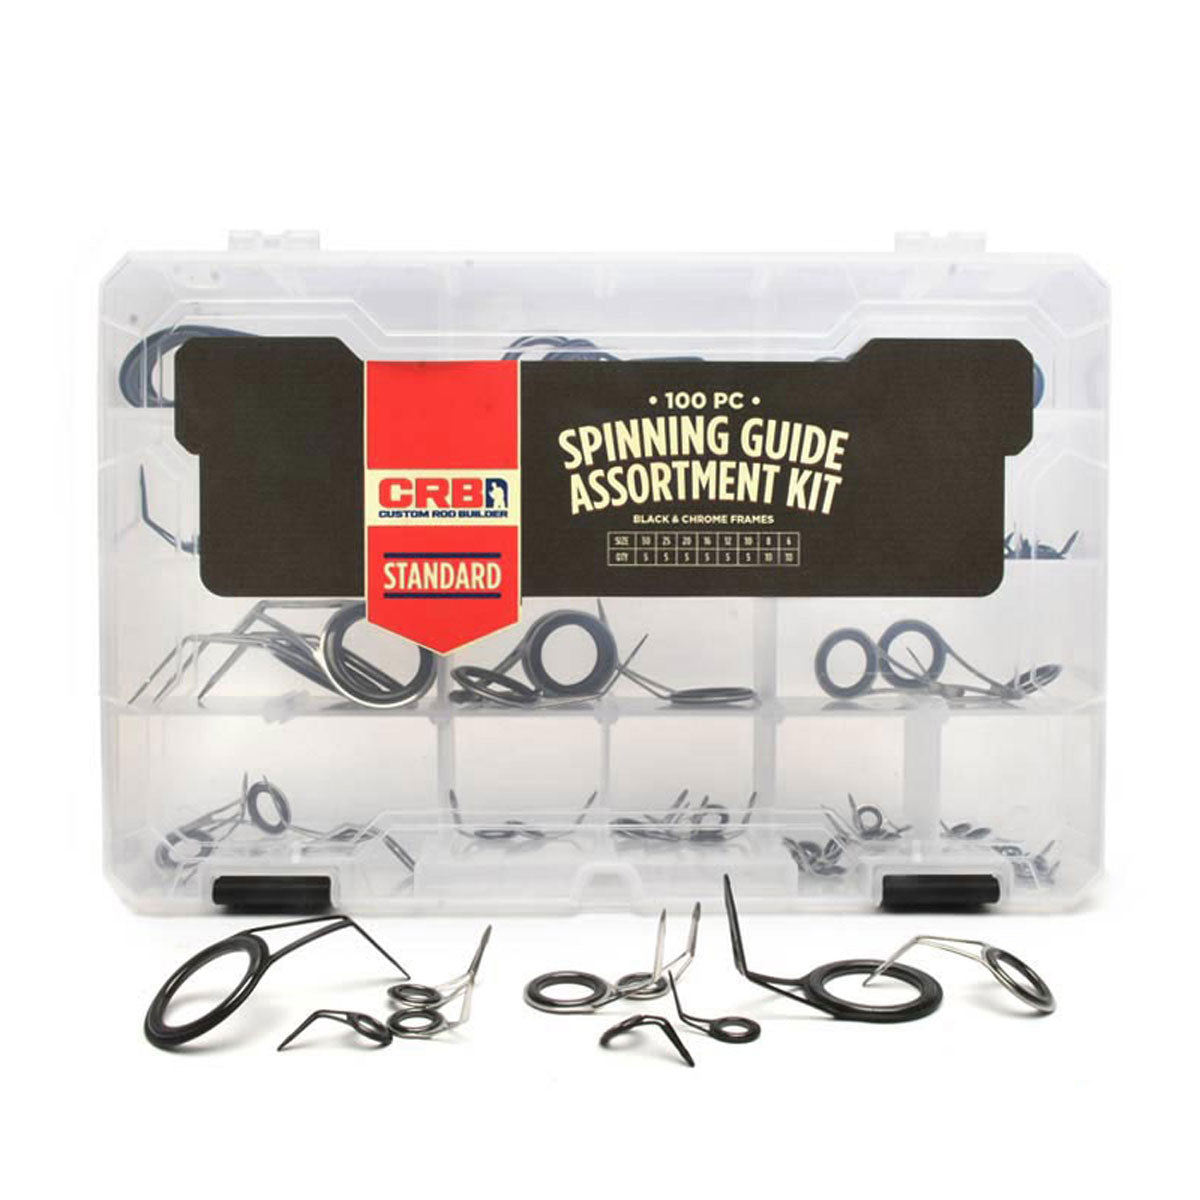 CRB Spinning Guide Assortment Kits - Black & Chrome Combo